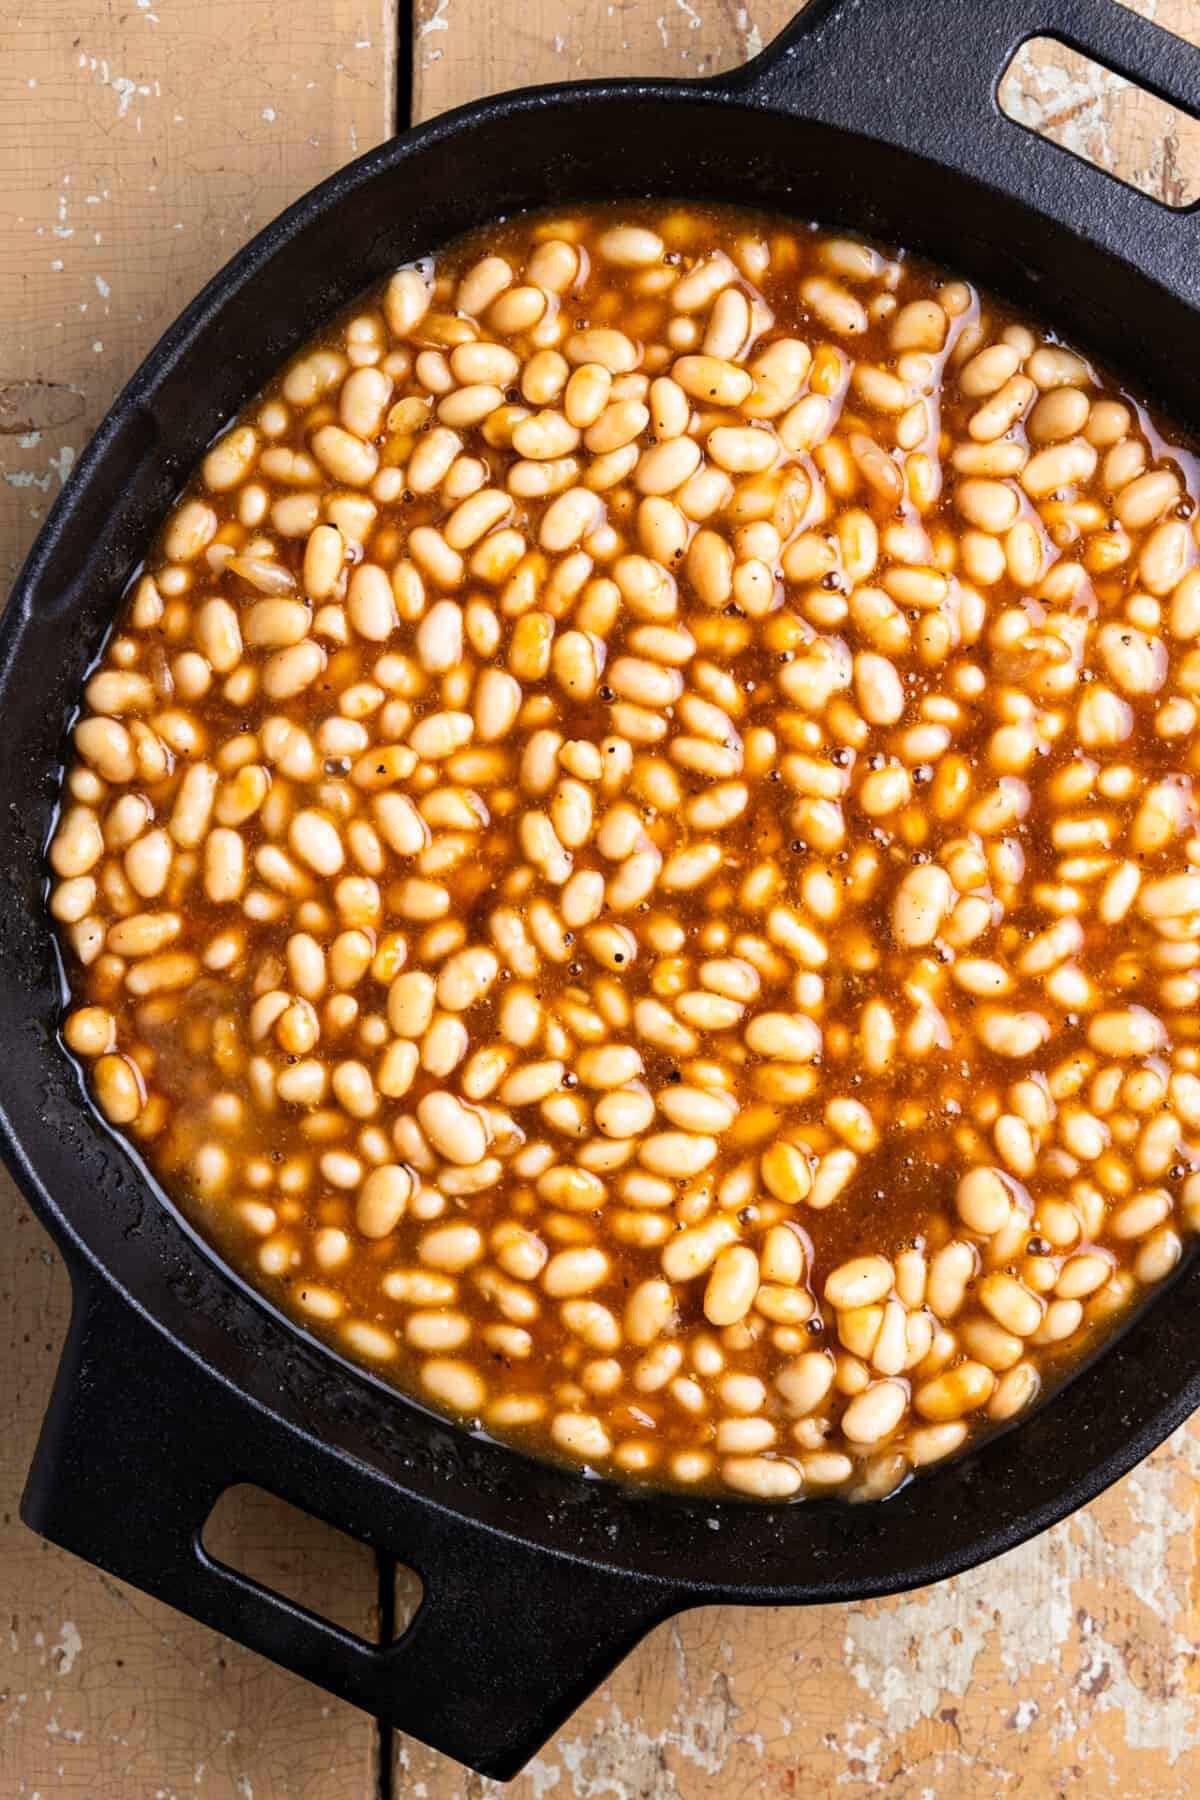 Baked beans in a cast iron skillet before cooking.